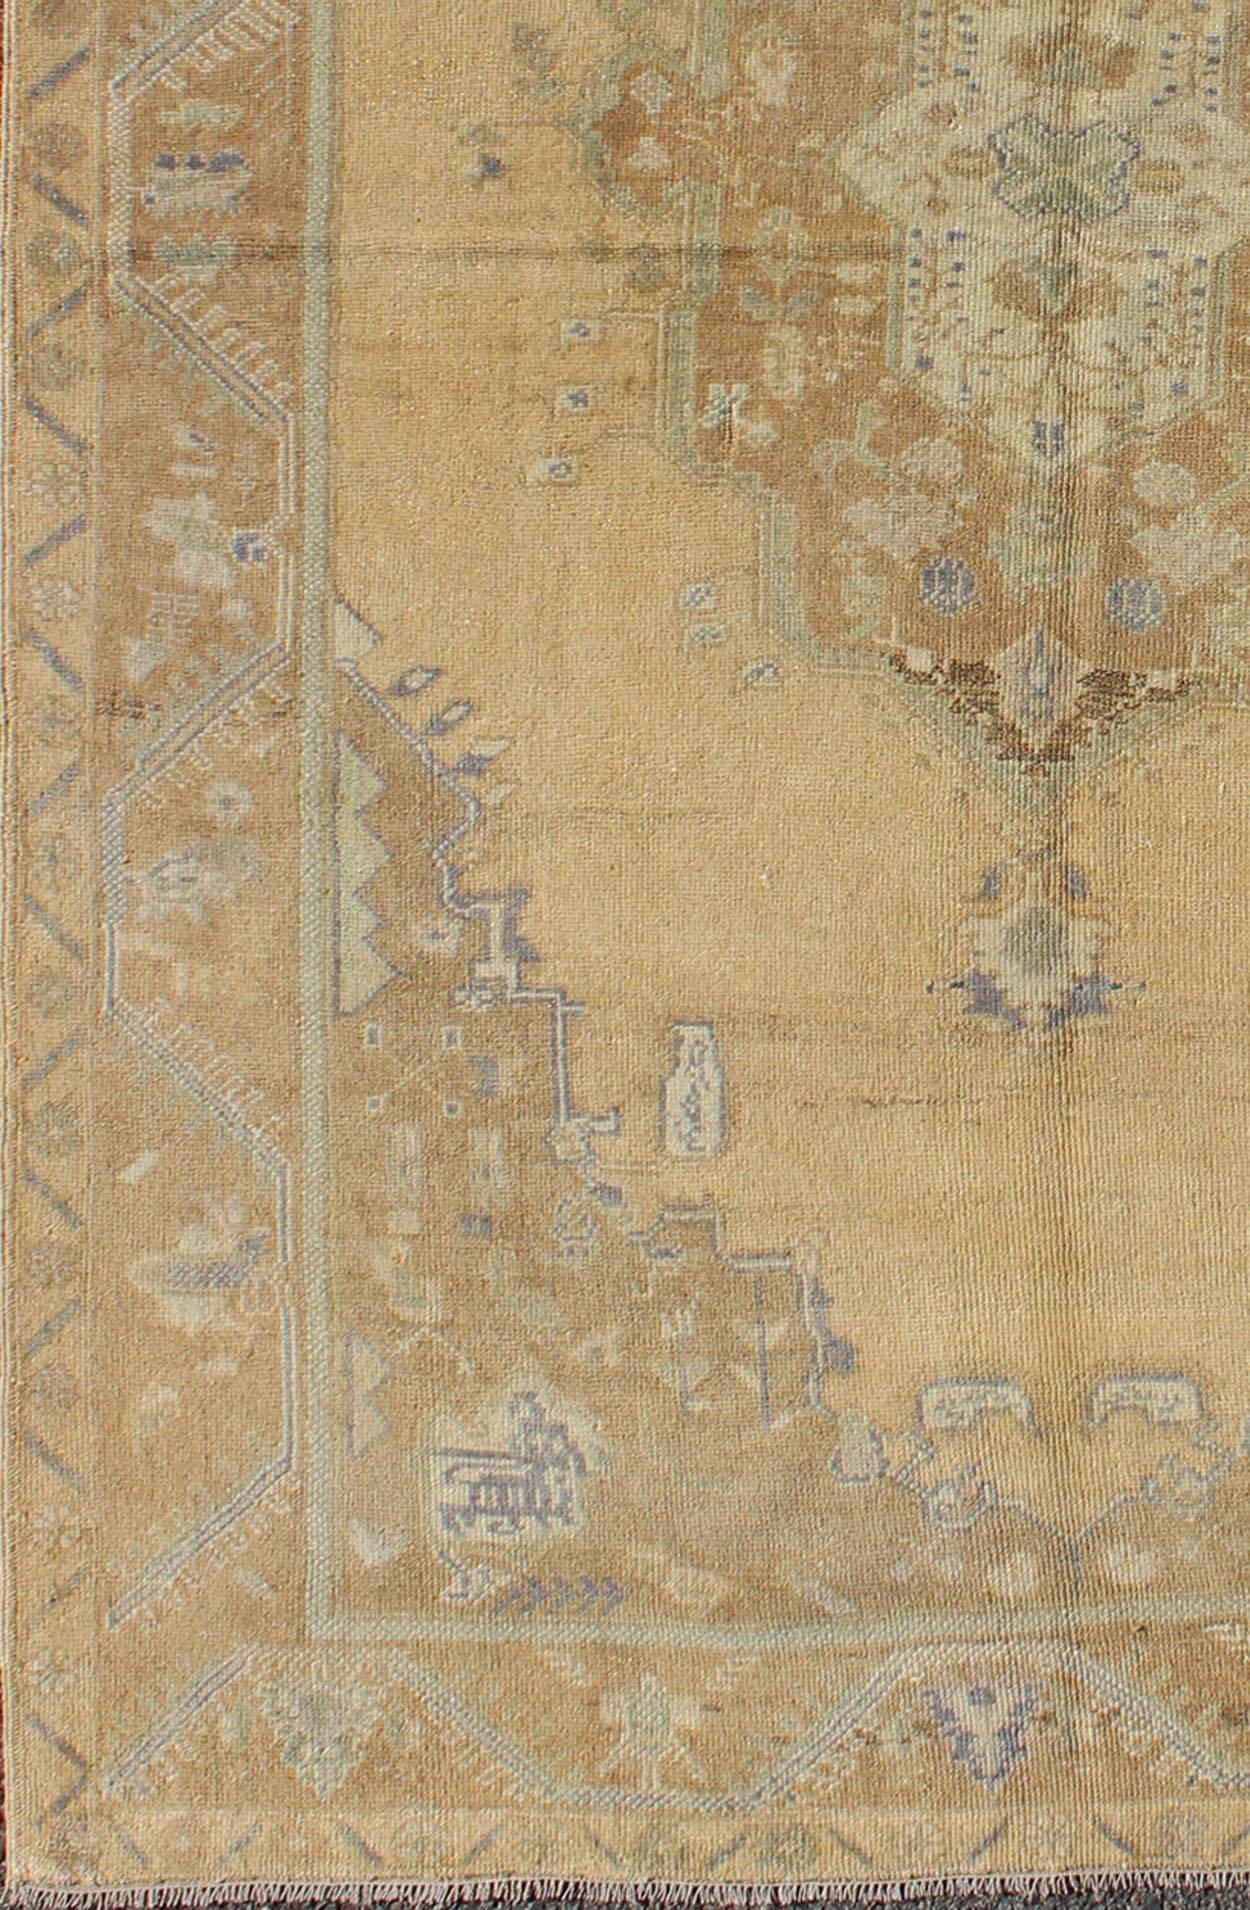 Faded vintage Turkish Oushak rug with layered medallion in shades of cream, yellow and light brown, rug en-657, country of origin / type: Turkey / Oushak, circa 1940

This Oushak rug features a unique blend of colors and an intricately beautiful